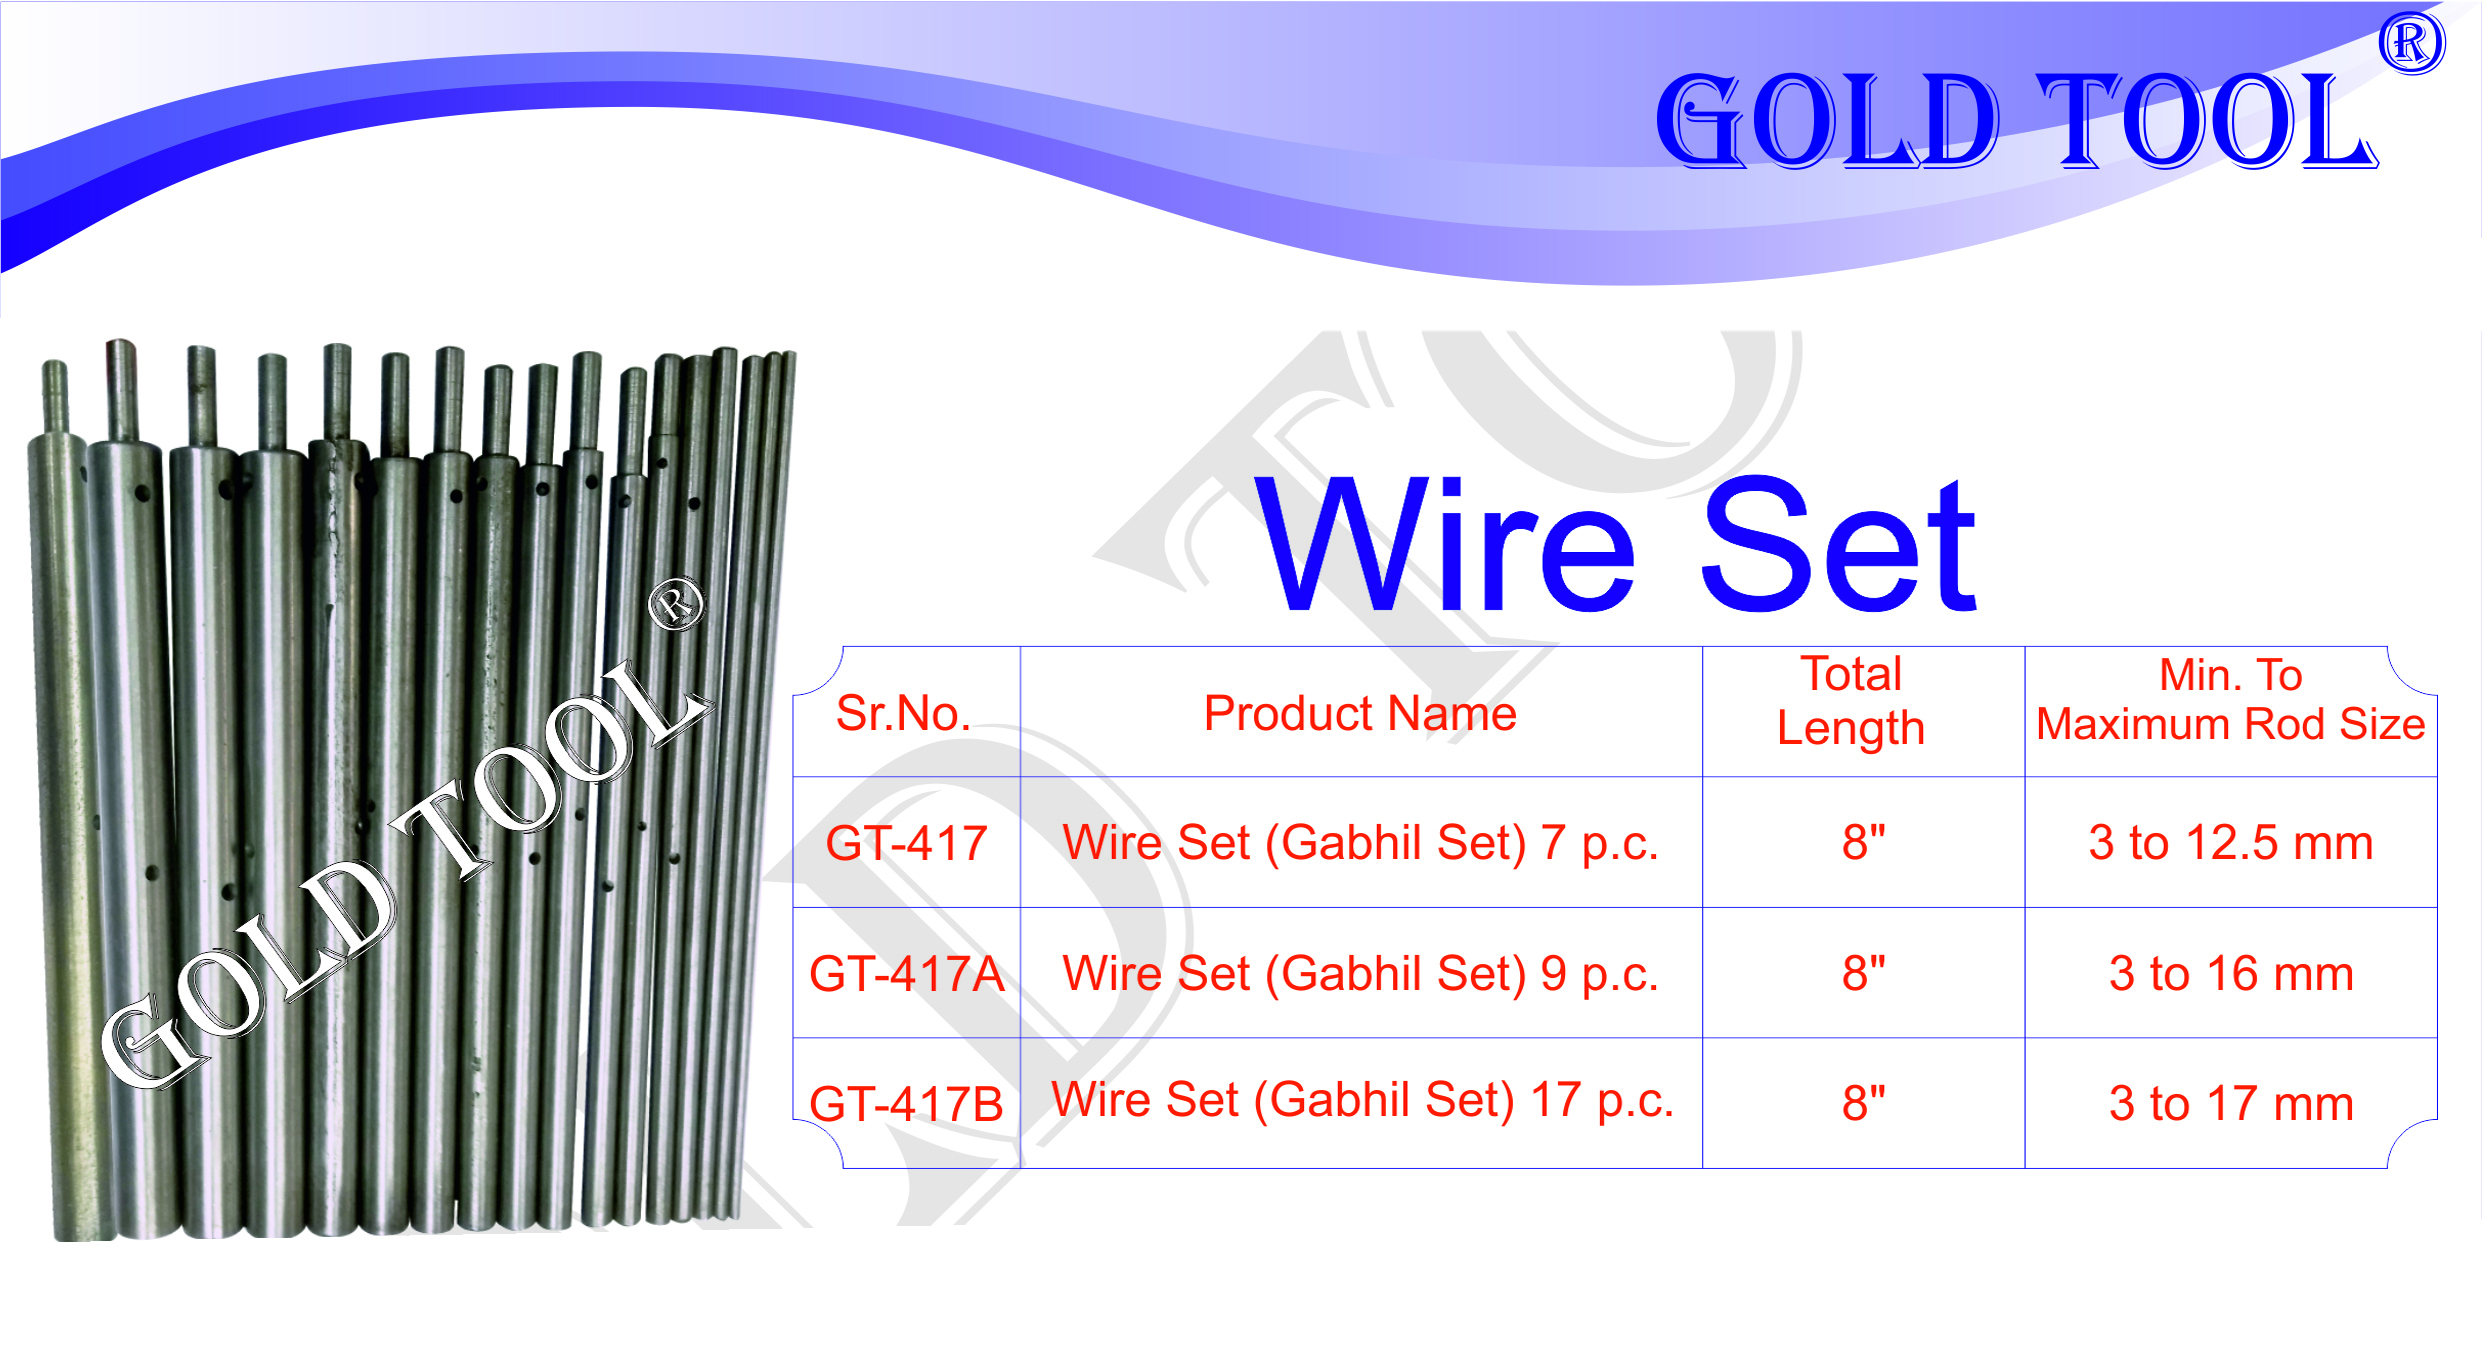 Gold Tool Wire Set